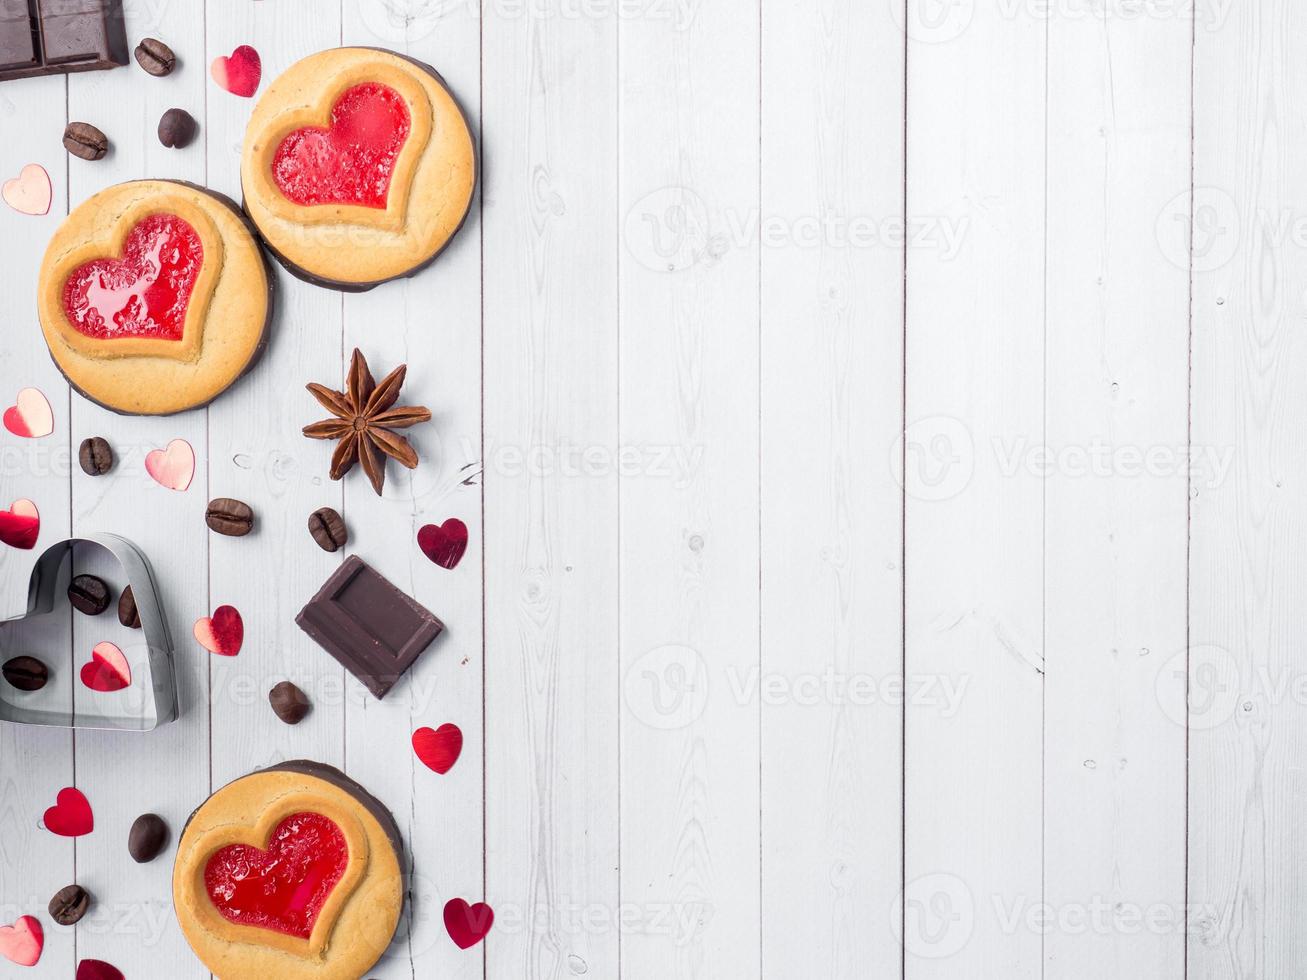 Homemade Cookies with a Red Jam Heart Valentine's Day Coffee and Chocolate Star Anise Copy space Flat lay photo